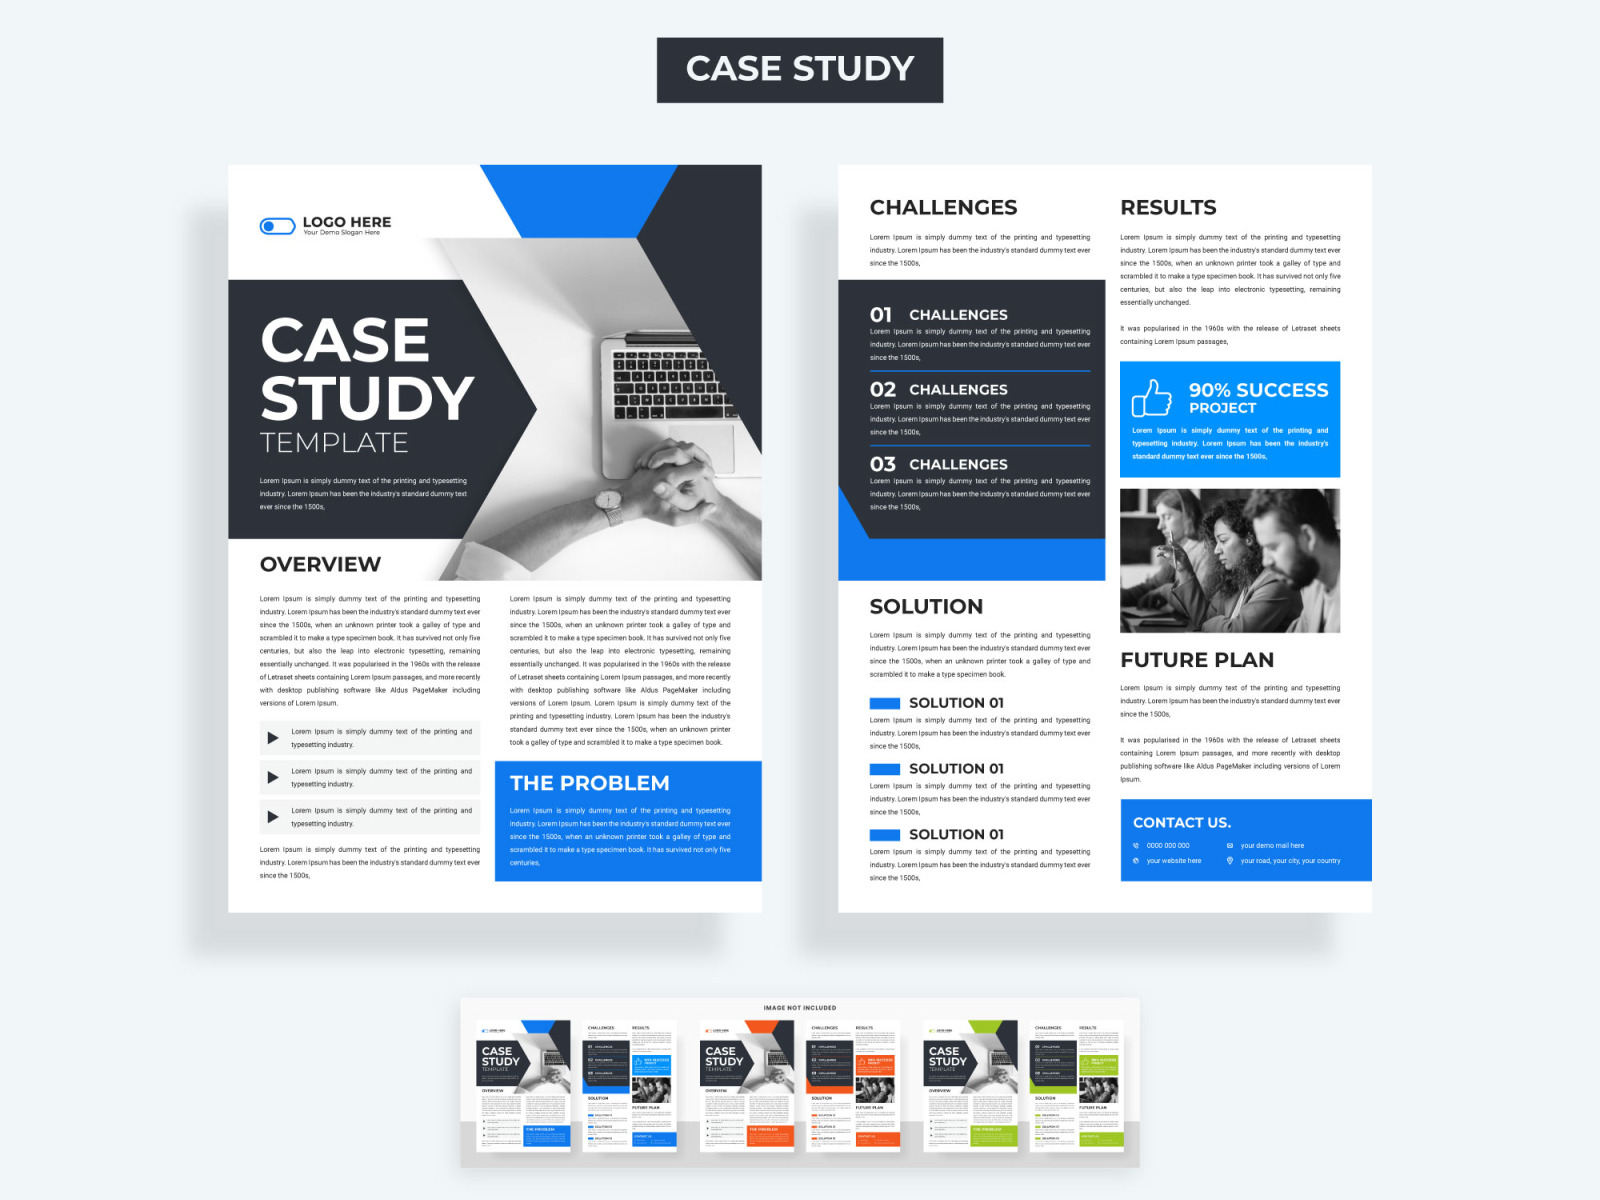 Case Study template design by Tanmoy Topu on Dribbble